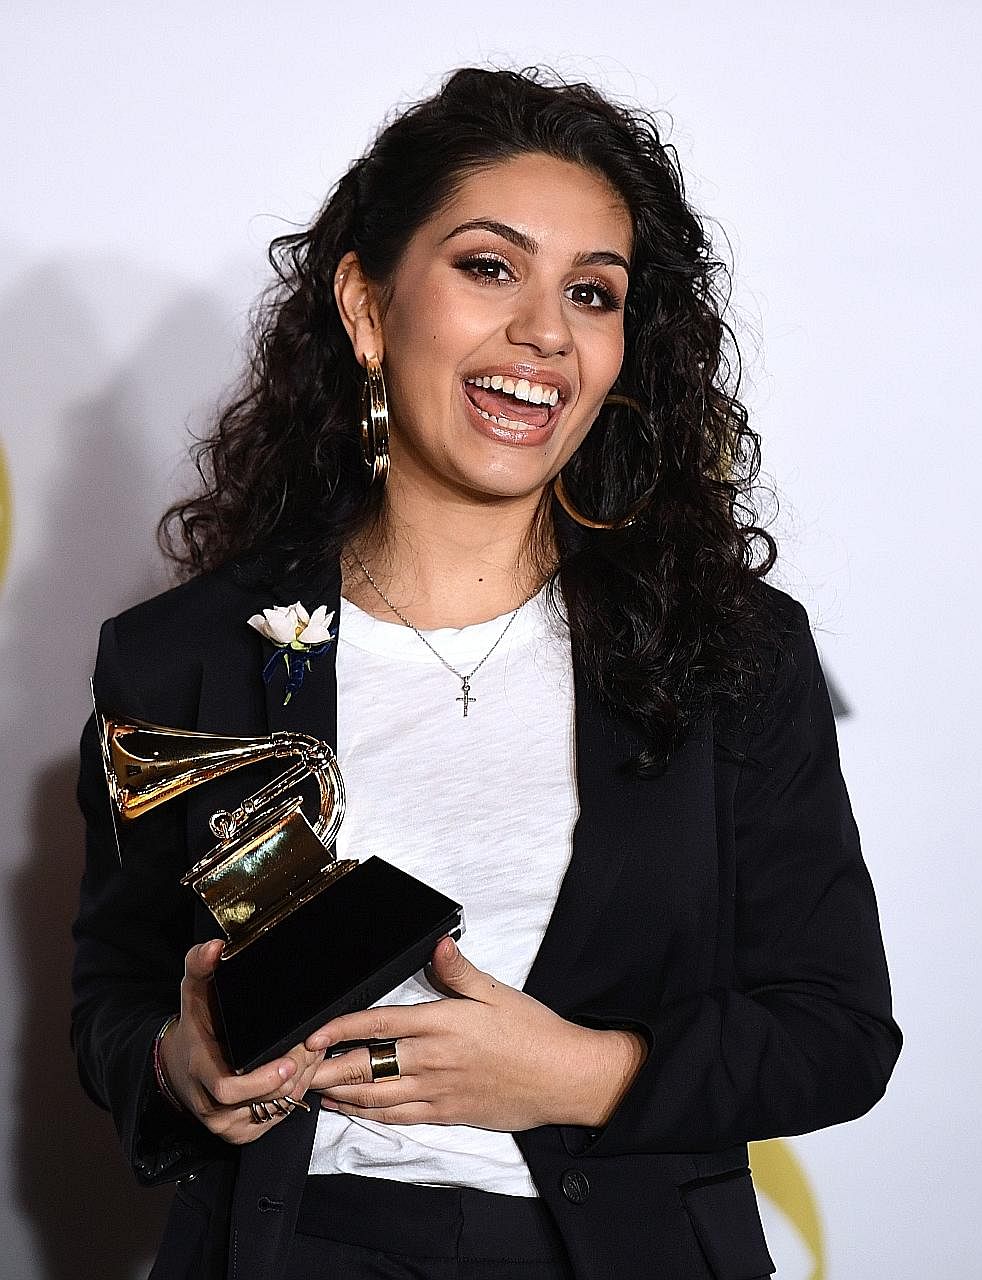 Singer Alessia Cara was the only woman to take home a major solo award, for Best New Artist, at this year's Grammy Awards.